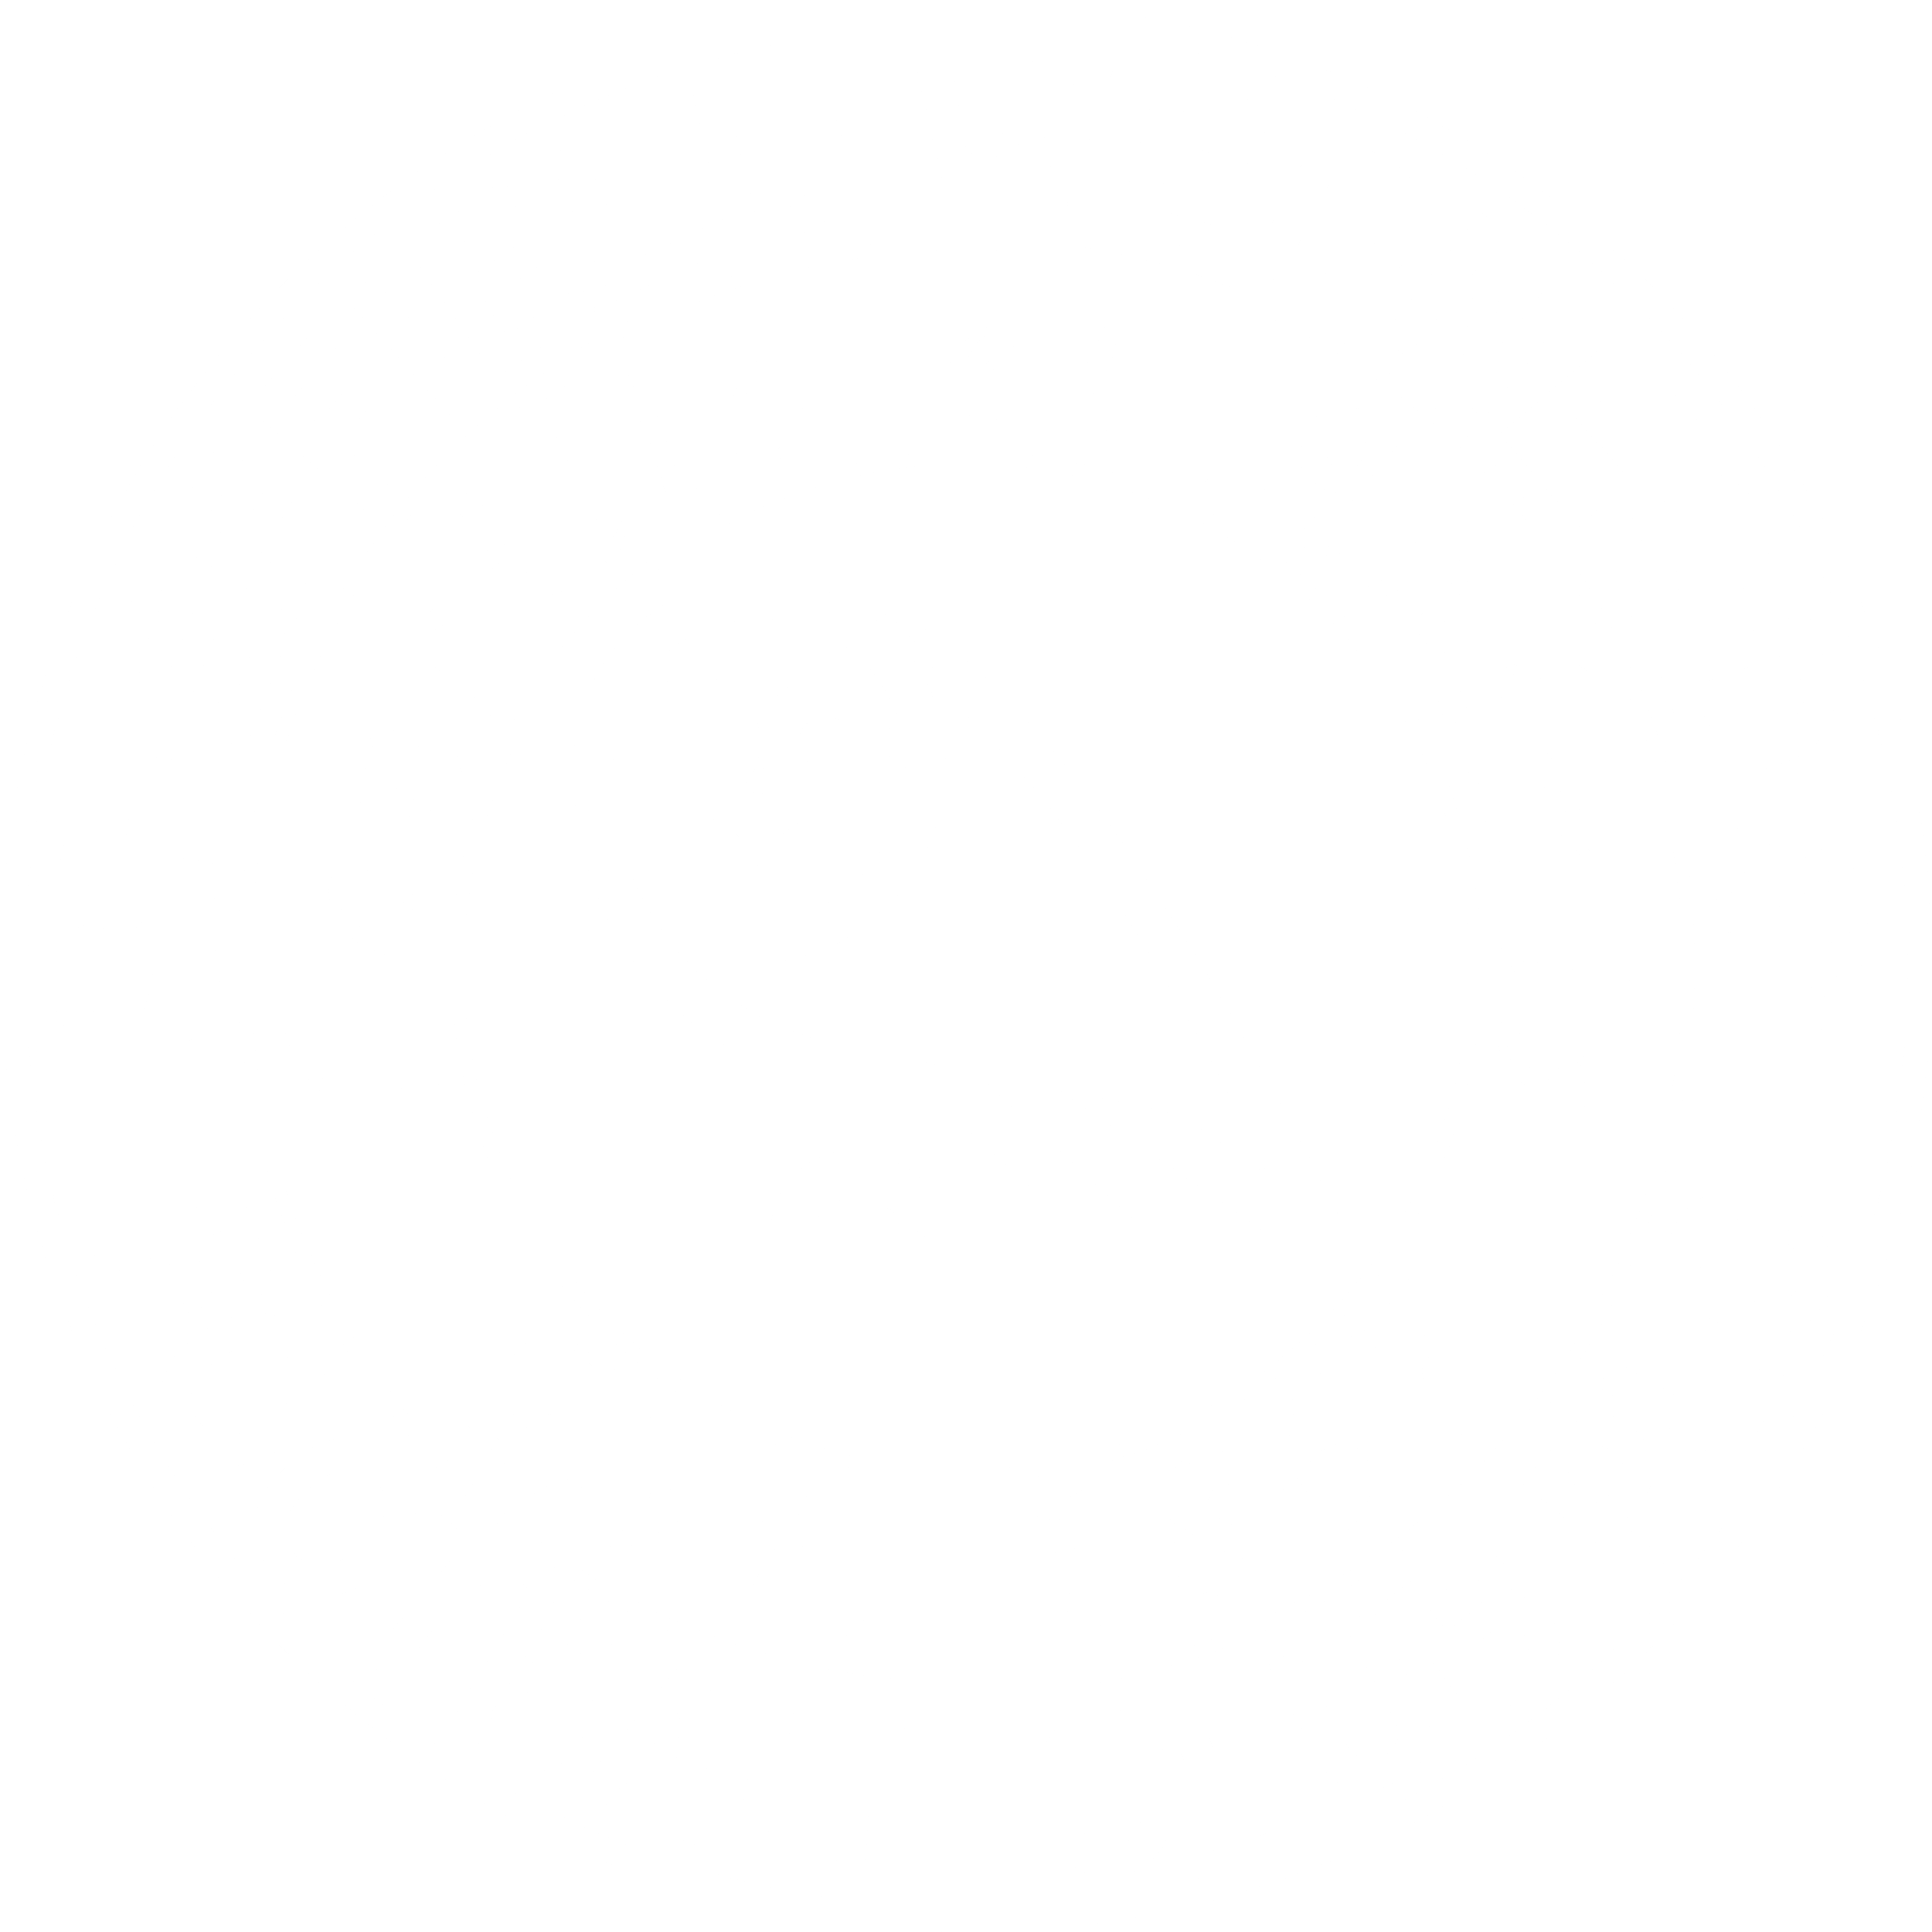 Sheffield Wednesday Fc Logo Black And White - Plain White Square Background (2400x2400), Png Download